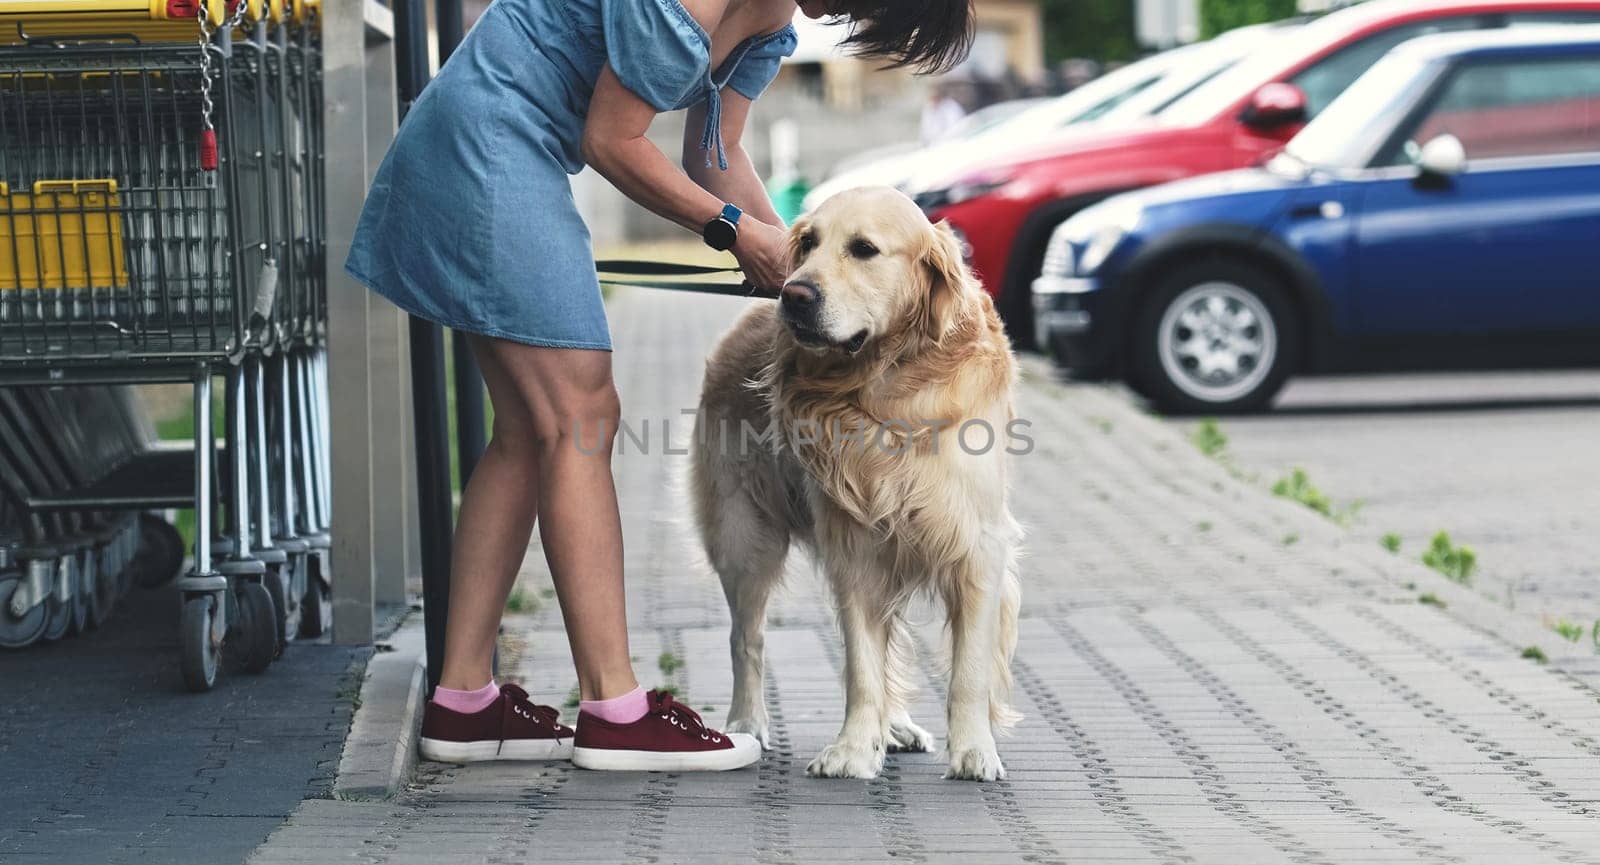 Golden retriever dog waiting owner at street near supermarket. Girl taking out leash from purebreed pet doggy outdoors